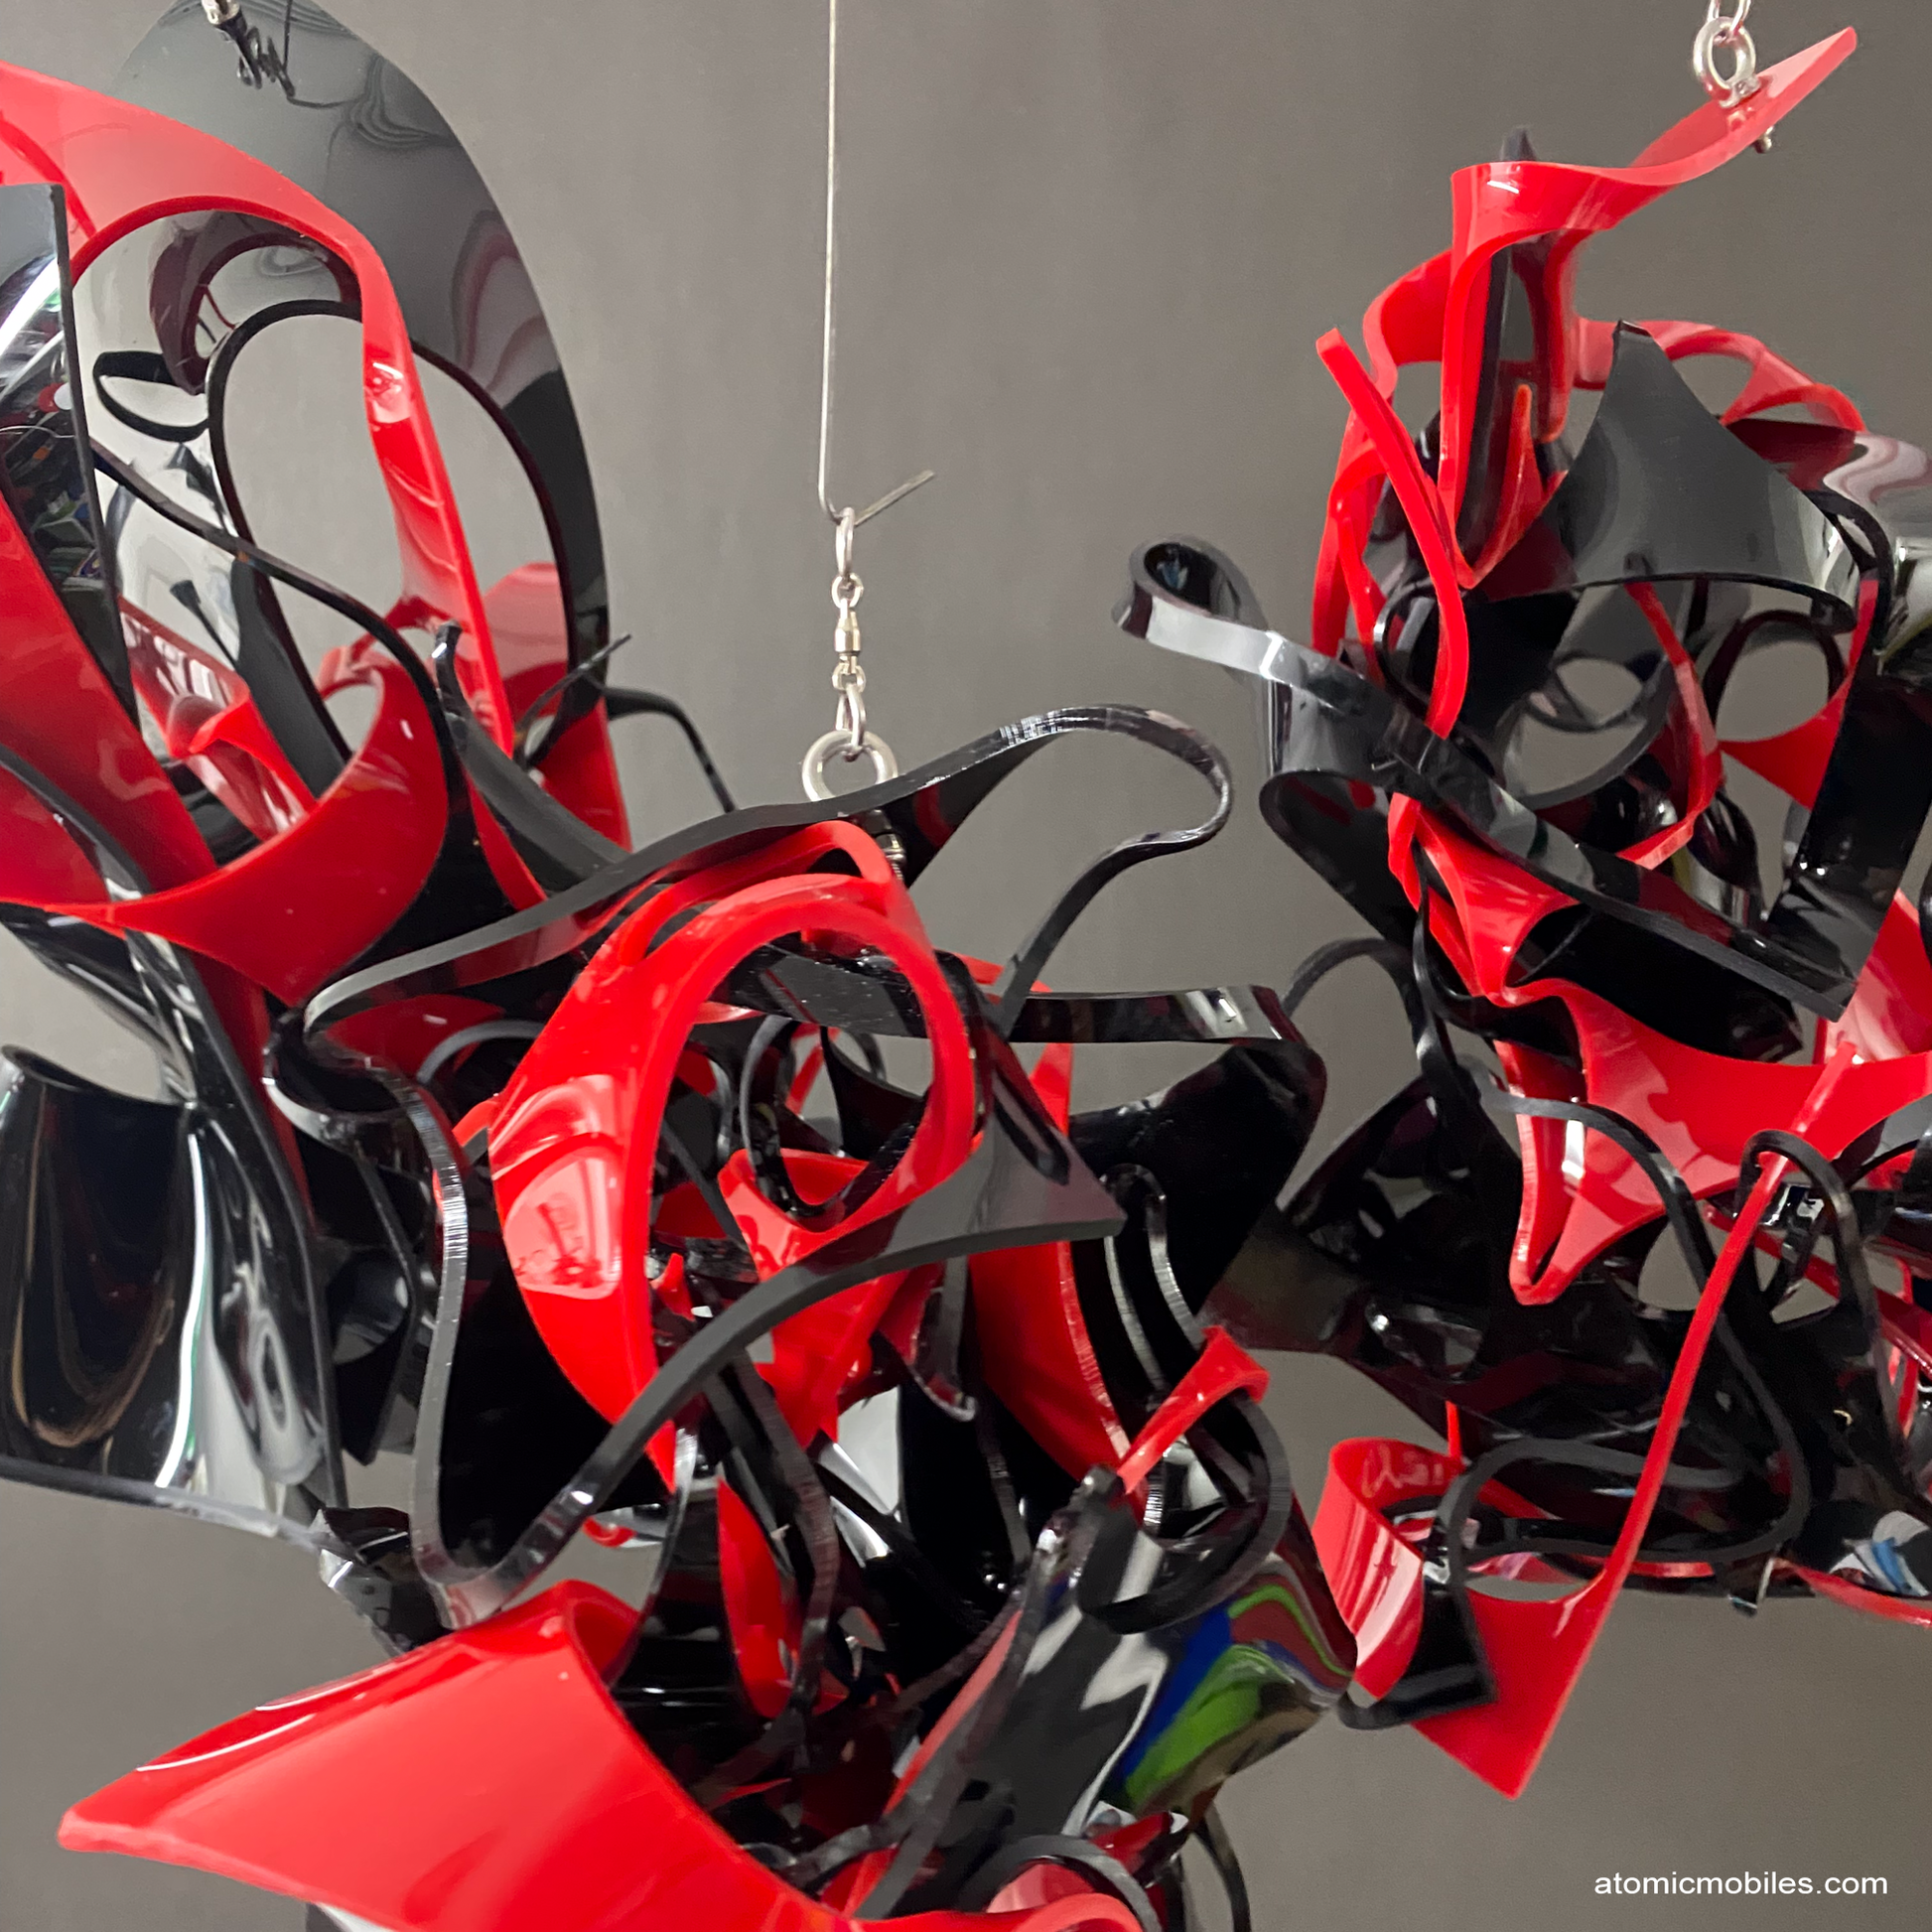 Incredibly unique trio of 3 black and red abstract art mobiles made from plexiglass acrylic - unique one of a kind kinetic art by AtomicMobiles.com